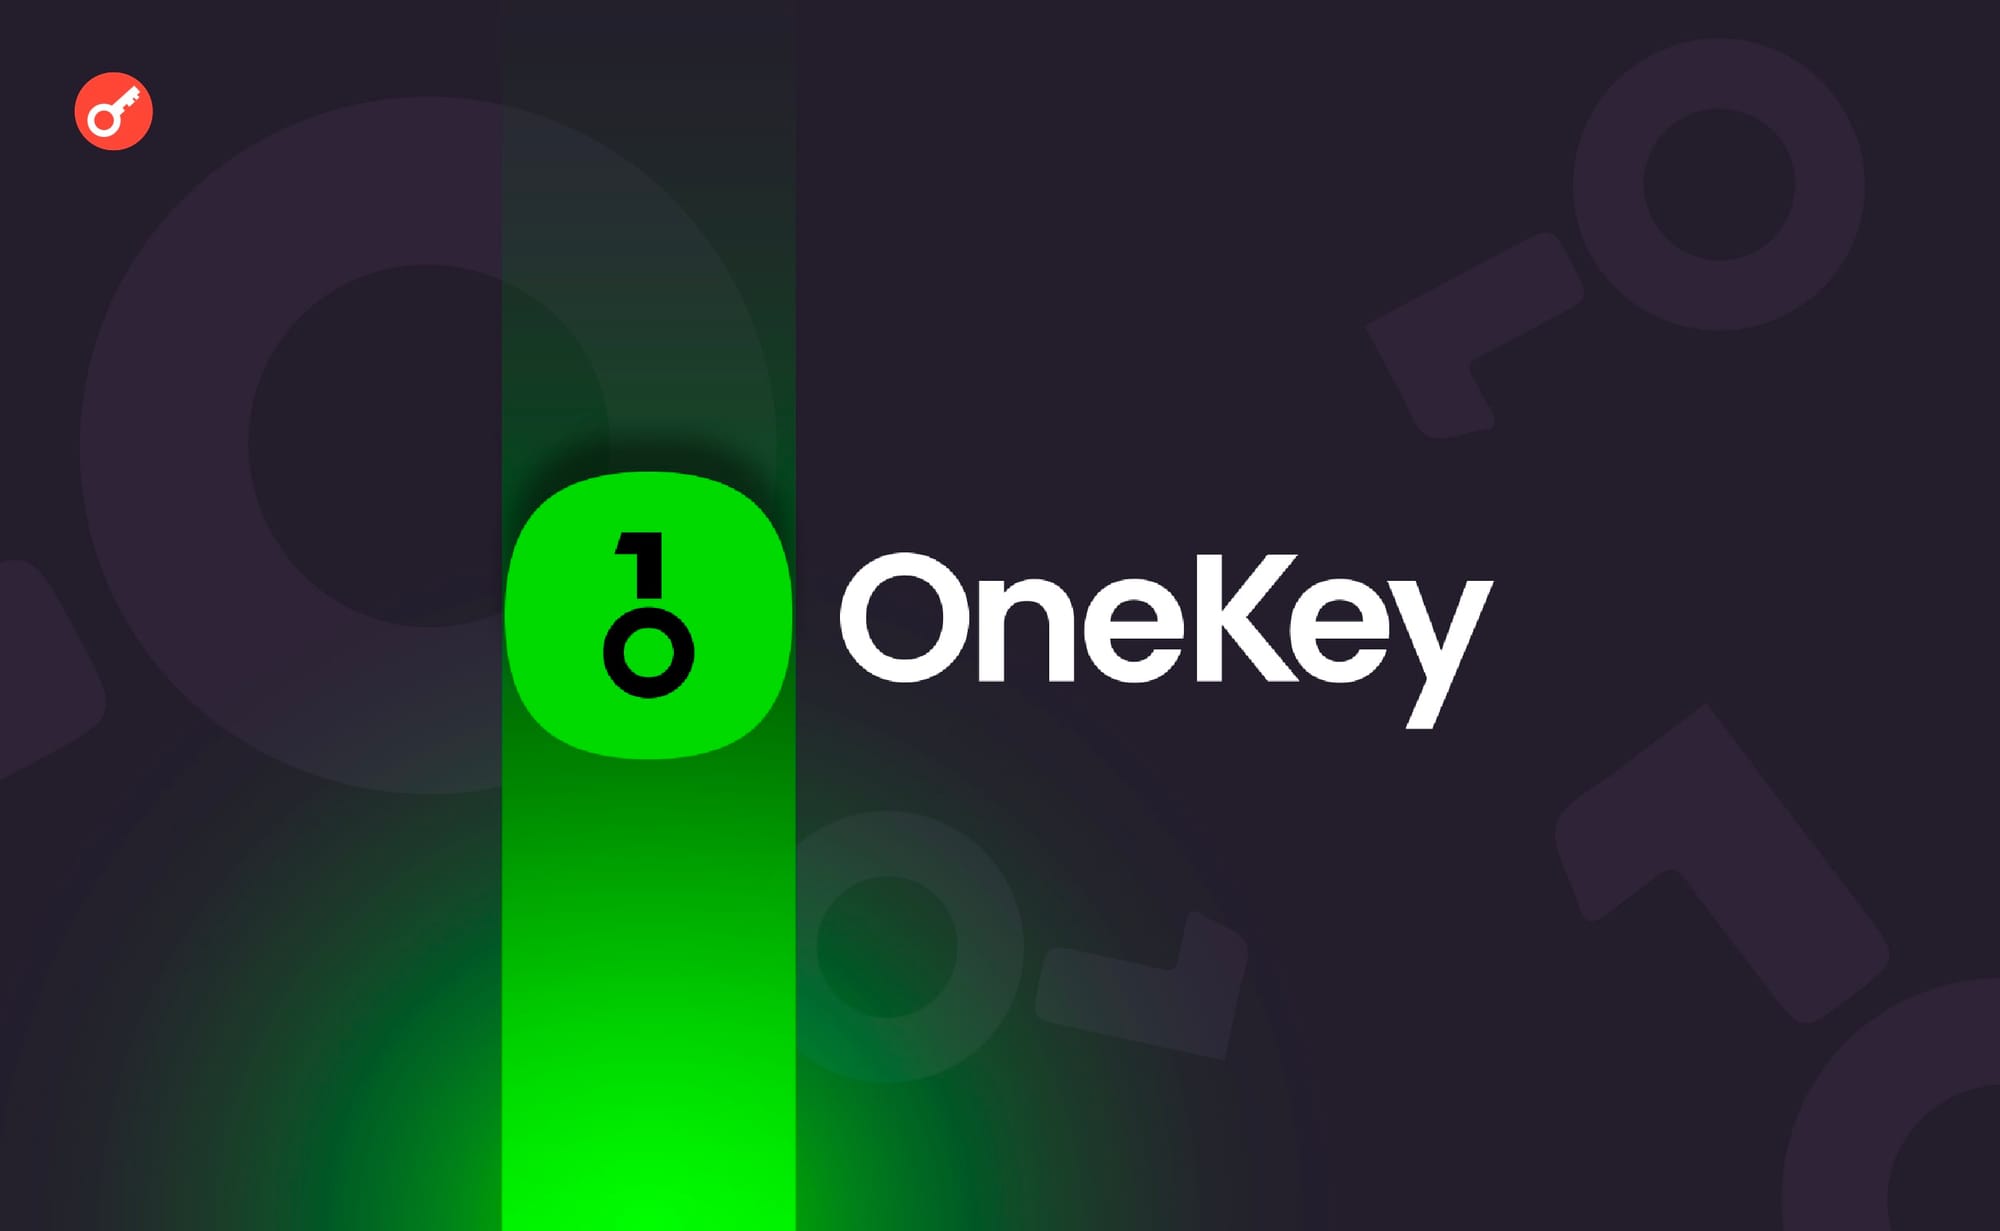 OneKey Introduced hardware crypto wallets with EAL6+ Security Level